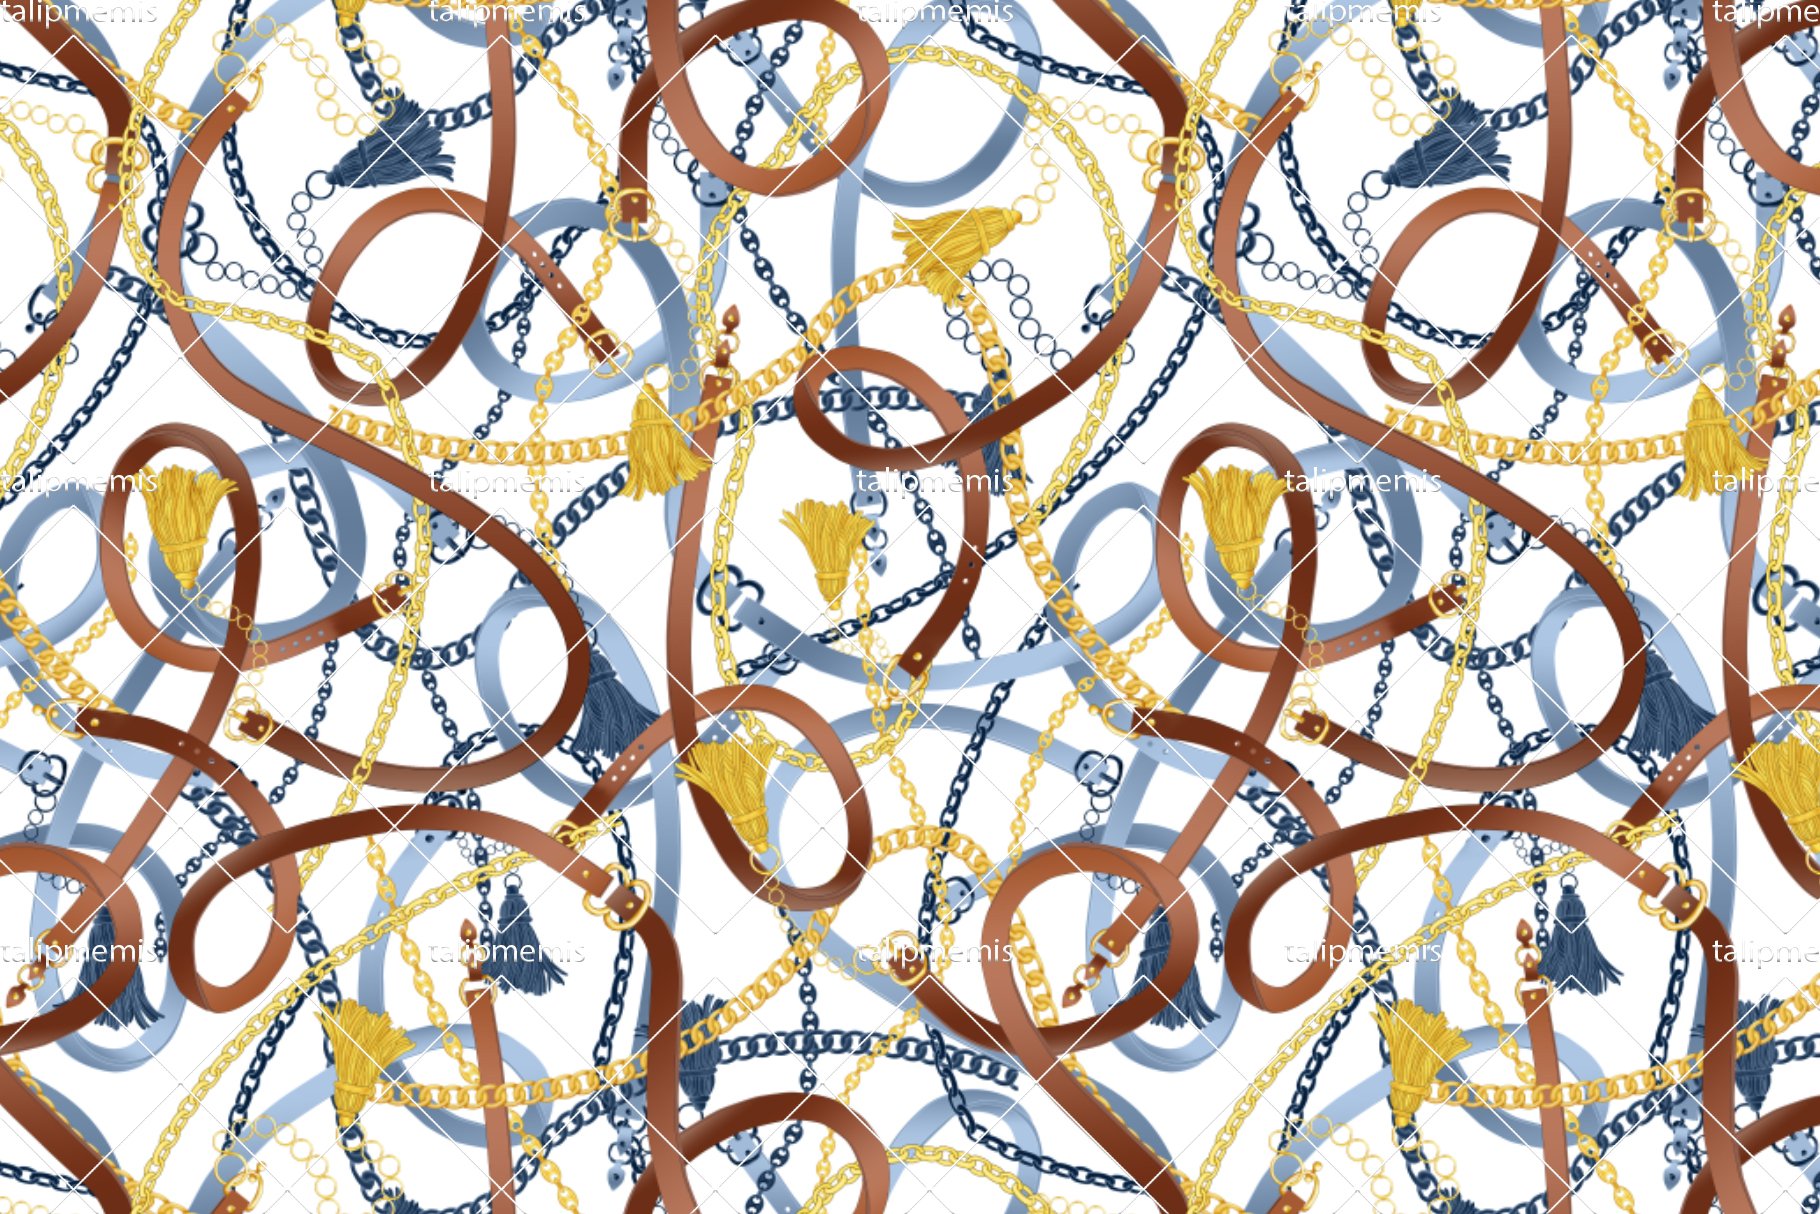 Chain and Belts - Seamless Pattern cover image.